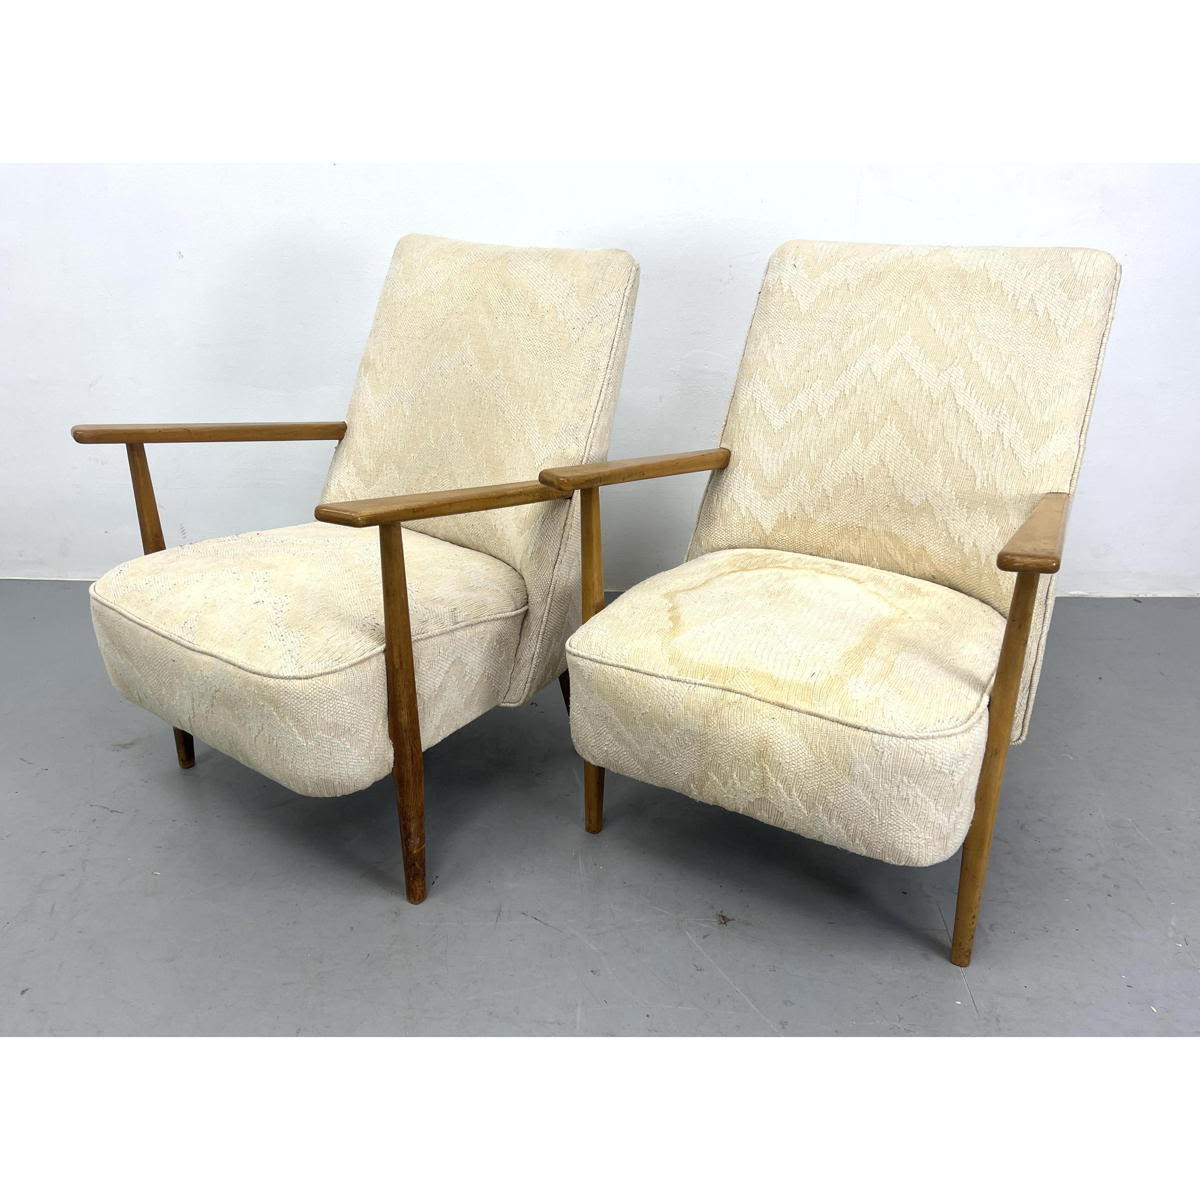 Pr Modernist Lounge Chairs. Open